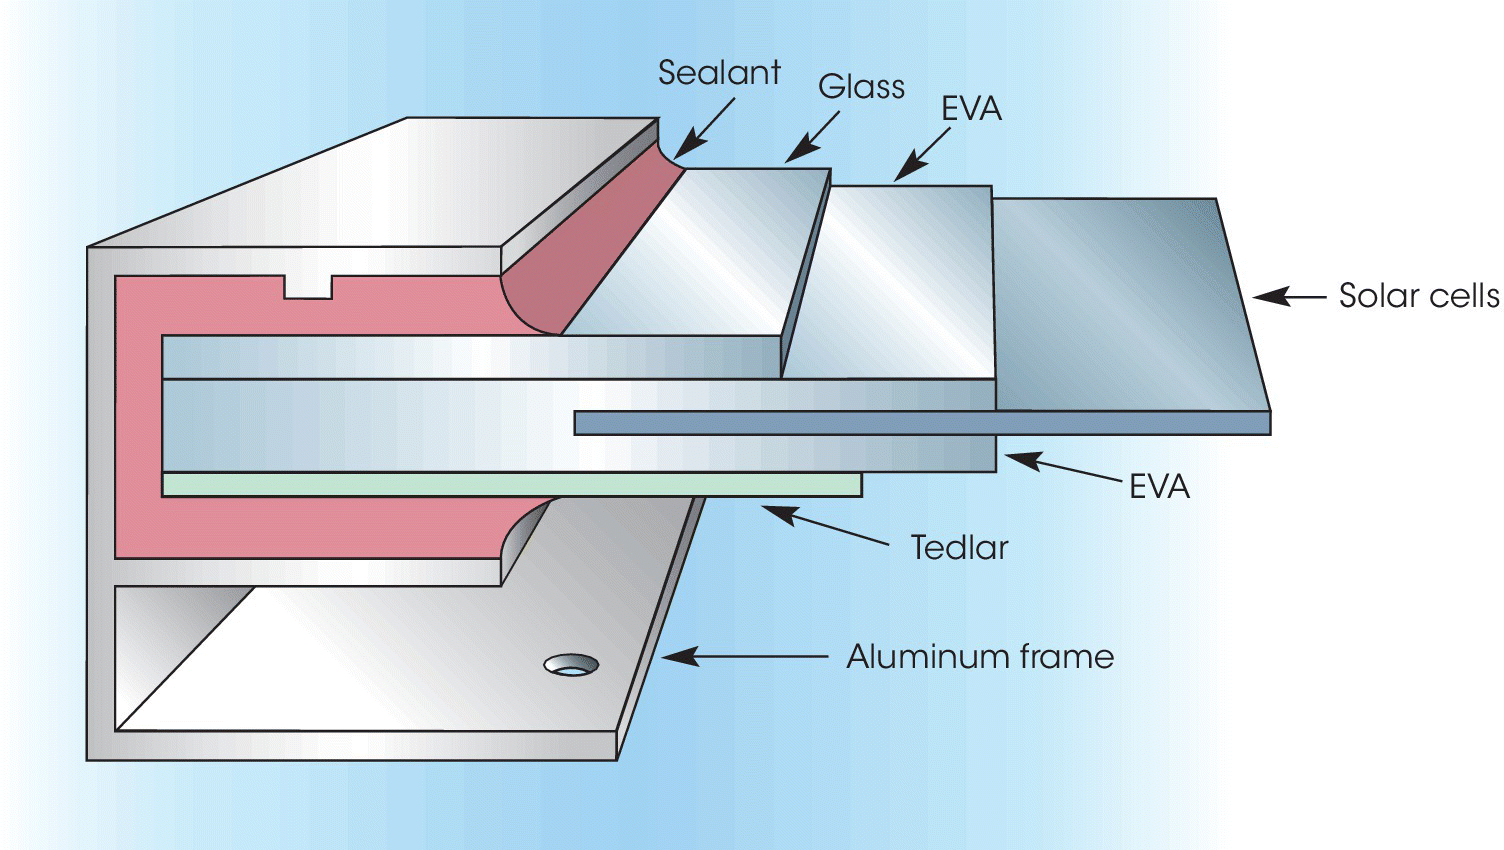 Illustration of a typical construction of a conventional crystalline Si PV module, with parts labeled sealant, glass, EVA, solar cells, EVA, tedlar, and aluminum frame (arrowed).